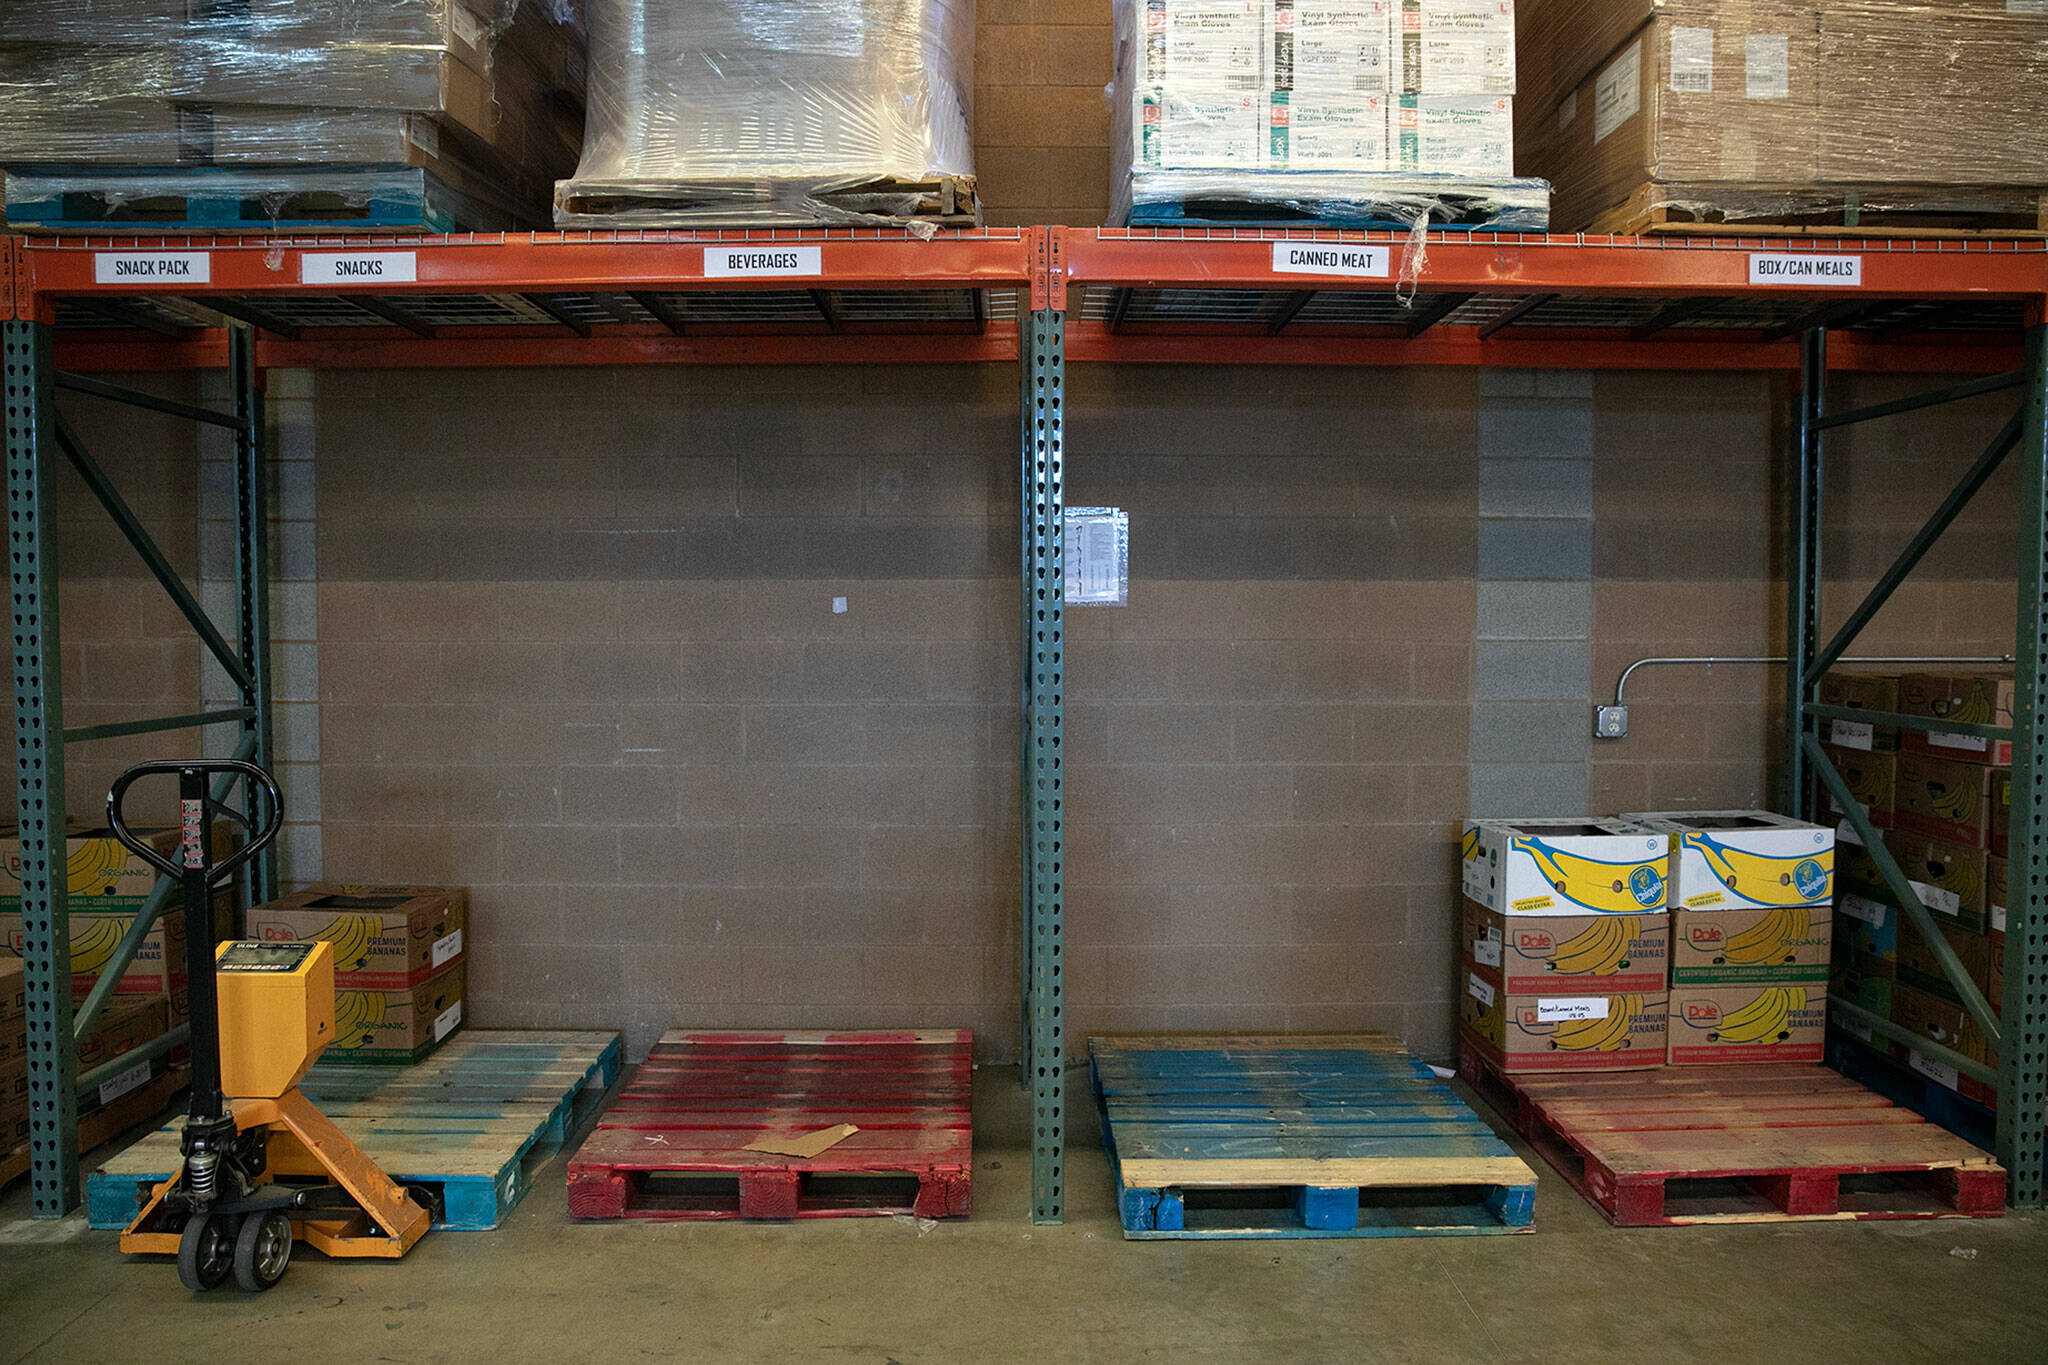 Pallets typically filled with foodstuffs are completely empty as the Everett Food Bank experiences never-before-seen shortages on Friday, in Everett. These storage areas are often two pallets deep, but many are now completely empty. (Ryan Berry / The Herald)